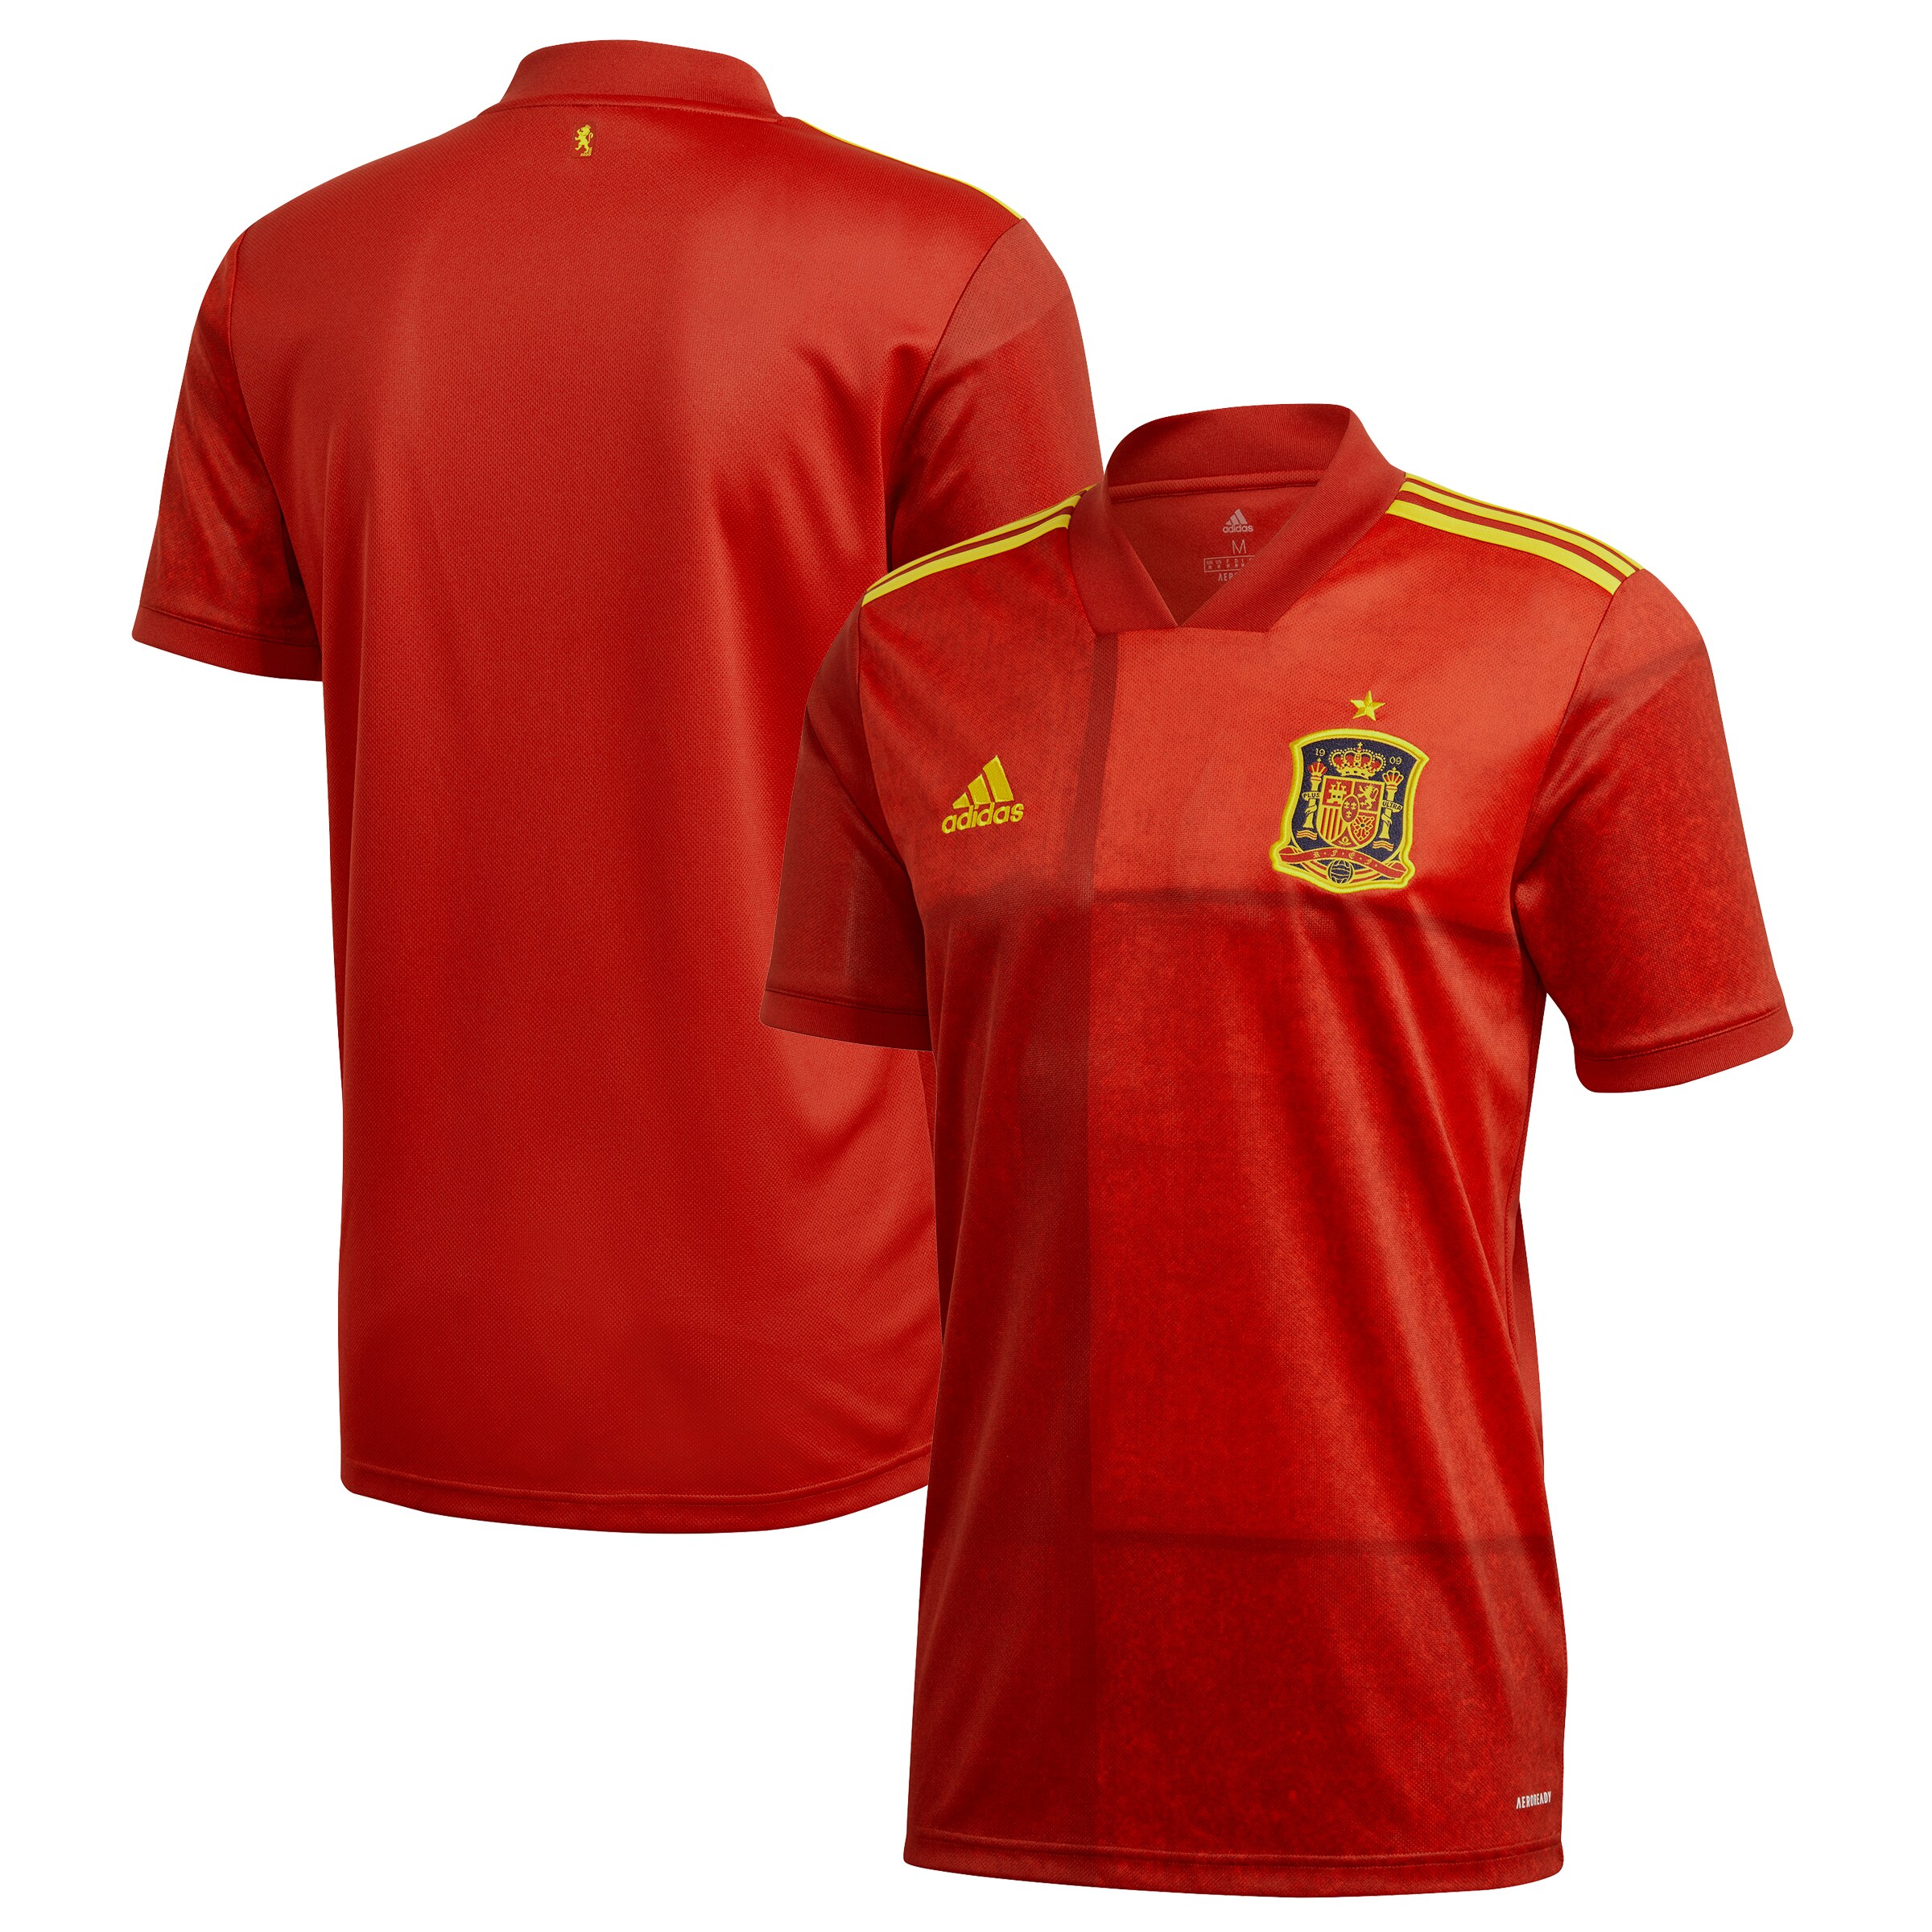 Spain National Team 2020 Home Jersey